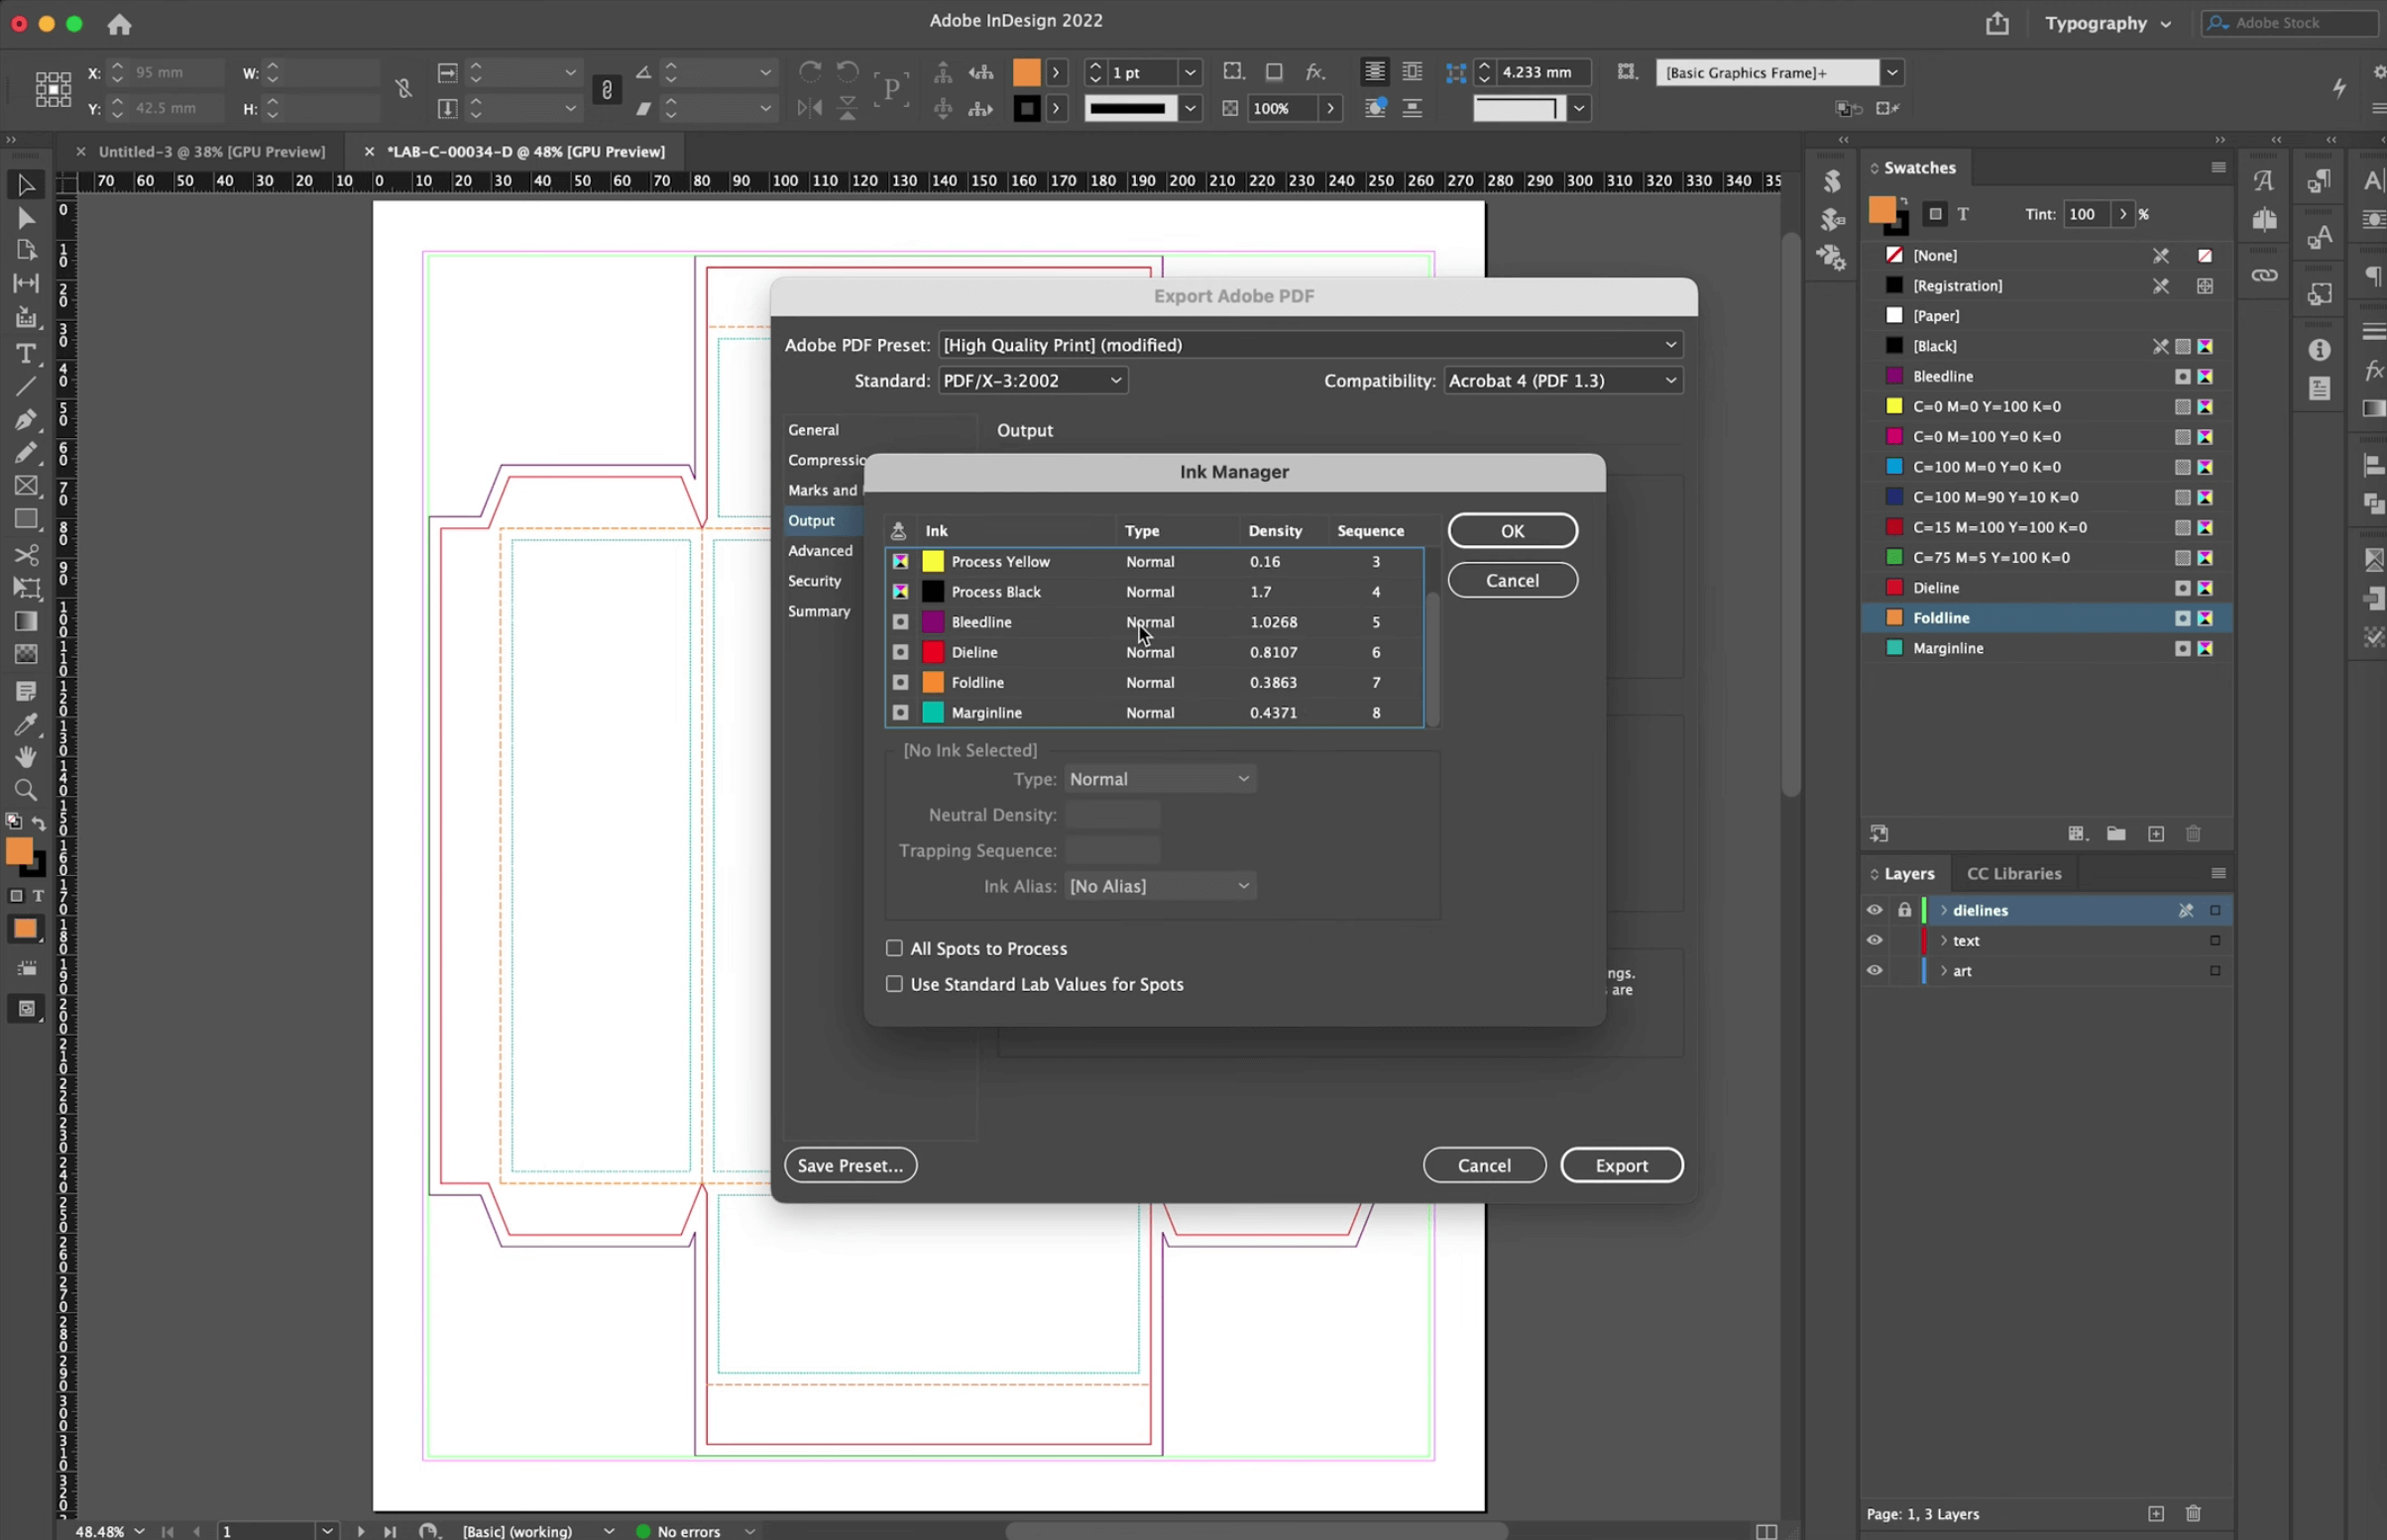 Screenshot: the Ink Manager pop-up in Adobe InDesign